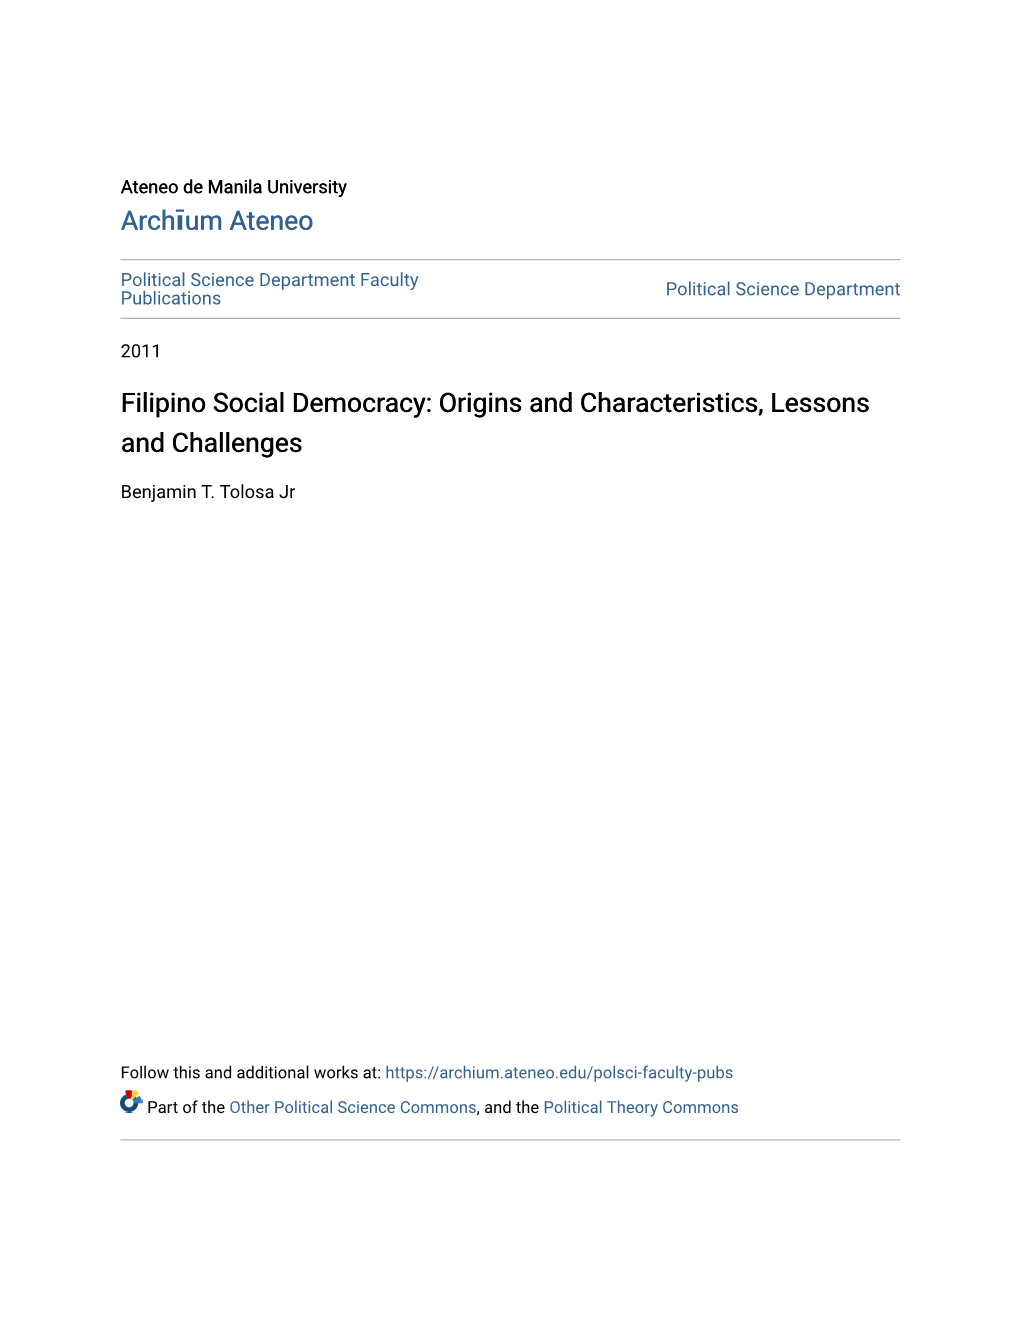 Filipino Social Democracy: Origins and Characteristics, Lessons and Challenges